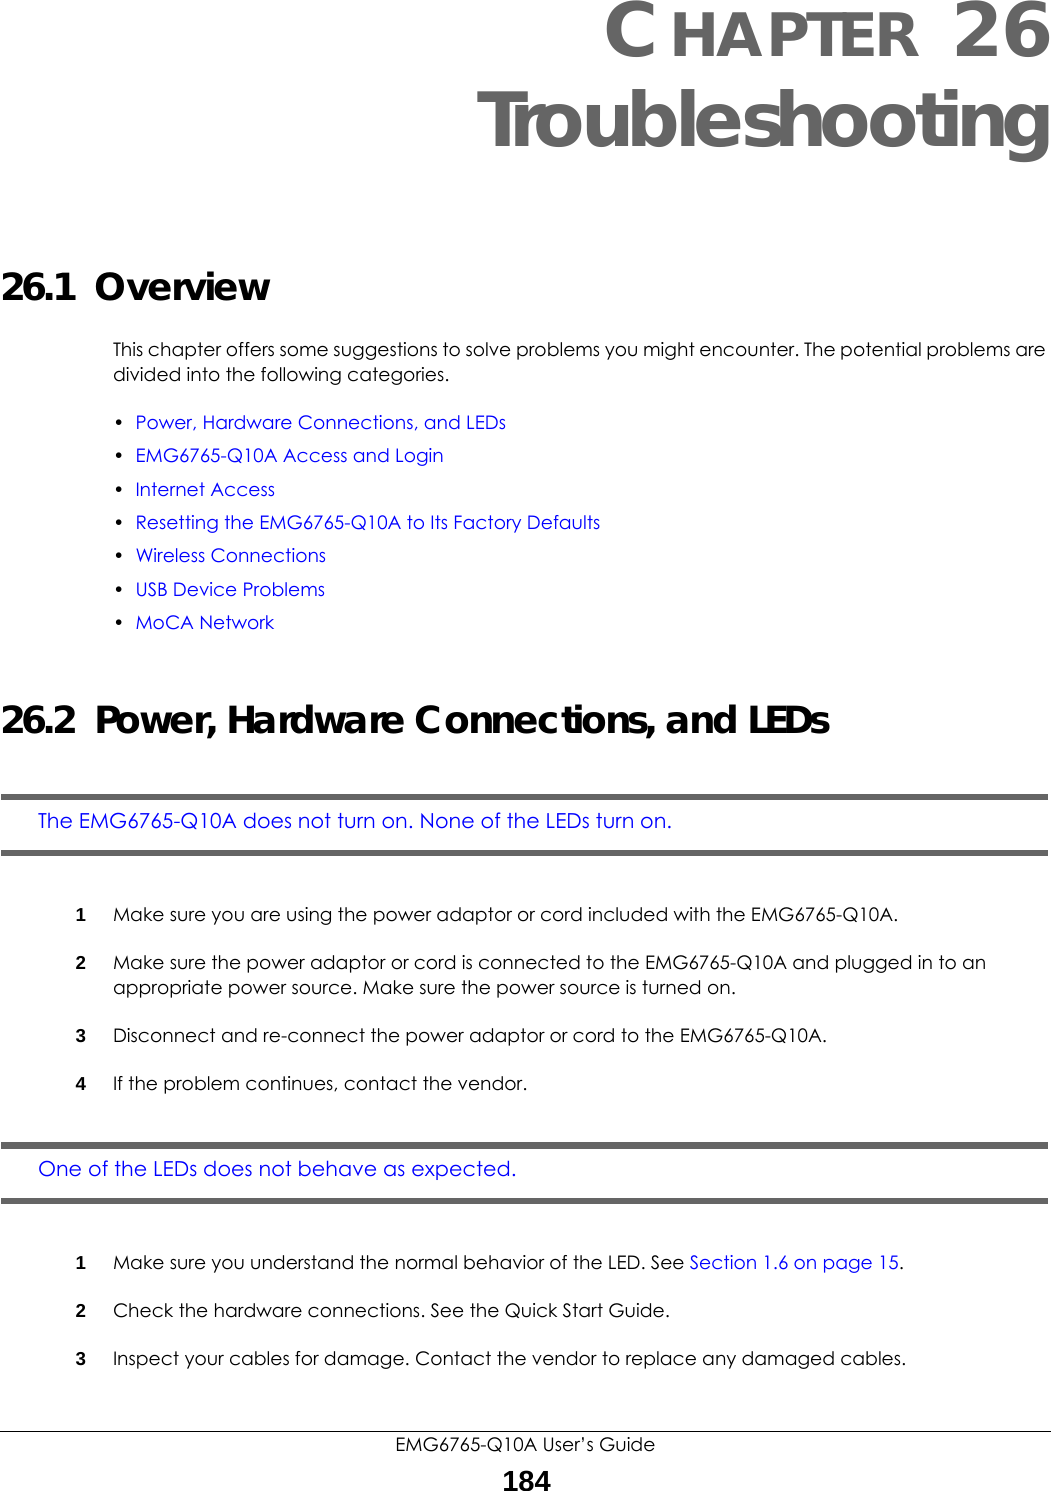 EMG6765-Q10A User’s Guide184CHAPTER 26Troubleshooting26.1  OverviewThis chapter offers some suggestions to solve problems you might encounter. The potential problems are divided into the following categories. •Power, Hardware Connections, and LEDs•EMG6765-Q10A Access and Login•Internet Access•Resetting the EMG6765-Q10A to Its Factory Defaults•Wireless Connections•USB Device Problems•MoCA Network26.2  Power, Hardware Connections, and LEDsThe EMG6765-Q10A does not turn on. None of the LEDs turn on.1Make sure you are using the power adaptor or cord included with the EMG6765-Q10A.2Make sure the power adaptor or cord is connected to the EMG6765-Q10A and plugged in to an appropriate power source. Make sure the power source is turned on.3Disconnect and re-connect the power adaptor or cord to the EMG6765-Q10A.4If the problem continues, contact the vendor.One of the LEDs does not behave as expected.1Make sure you understand the normal behavior of the LED. See Section 1.6 on page 15.2Check the hardware connections. See the Quick Start Guide. 3Inspect your cables for damage. Contact the vendor to replace any damaged cables.